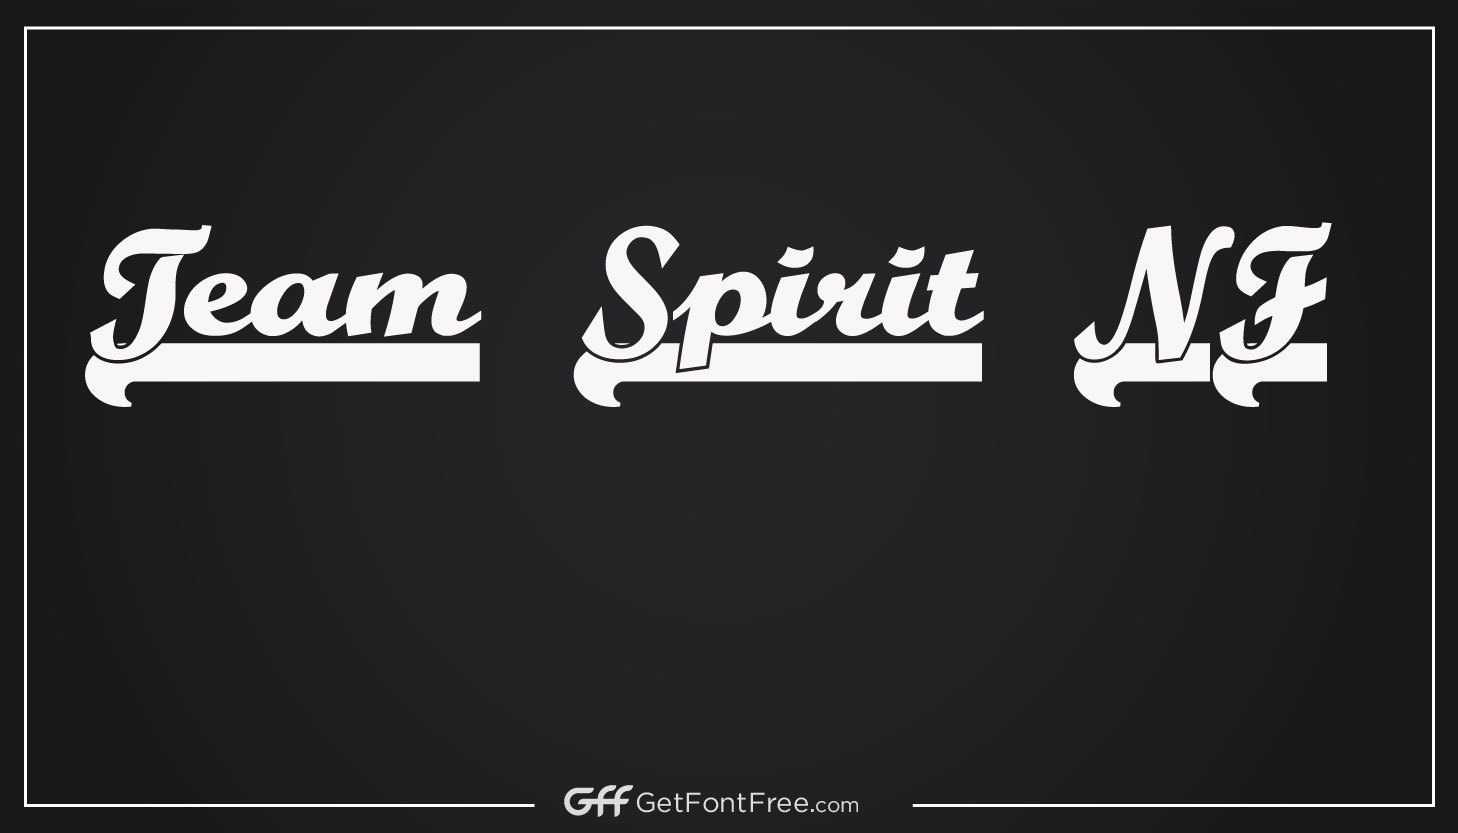 "Team Spirit NF" is likely a font that Nick Curtis, a type designer, created. The "NF" in the name likely stands for "Non-Fiction," which was the name of the font foundry that Curtis operated. Unfortunately, I do not have any additional information about the font itself, but you can try searching online to see if you can find any samples or more information about its design and usage.